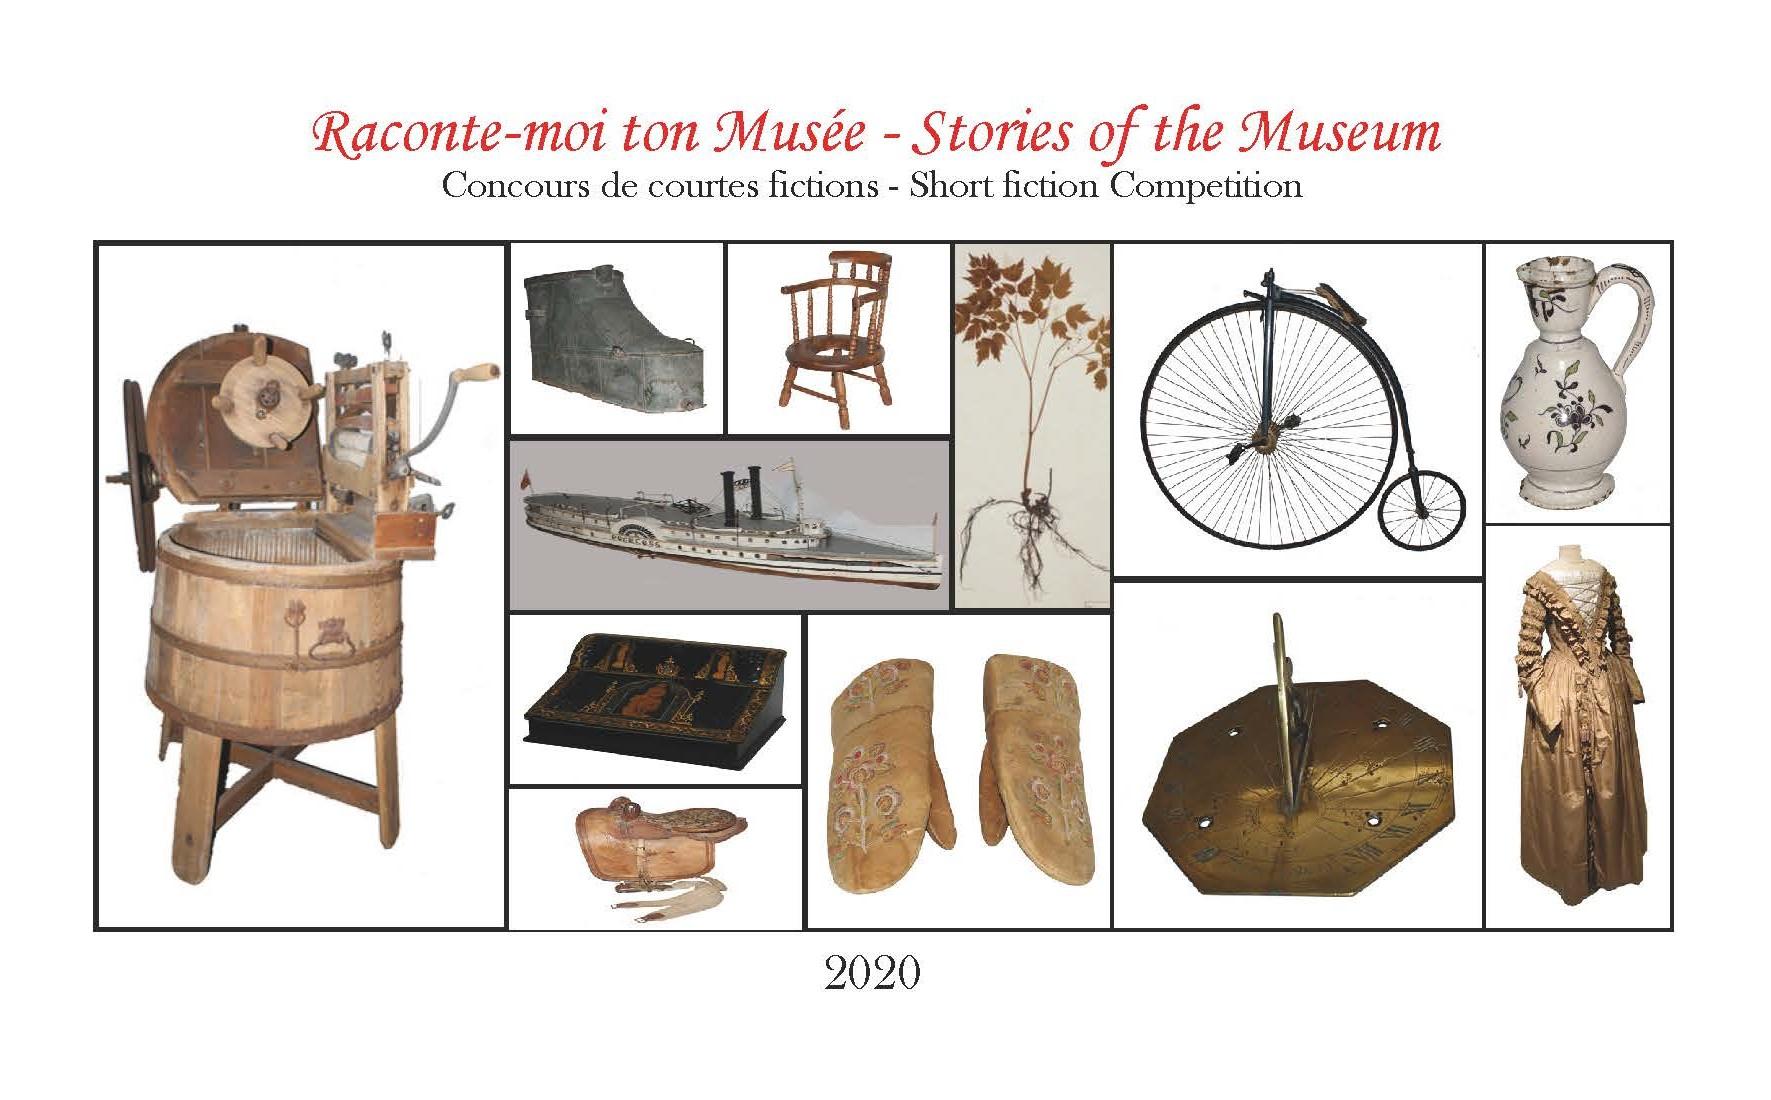 Winners of Argenteuil writing competition ‘Stories of the Museum’ to be announced April 28